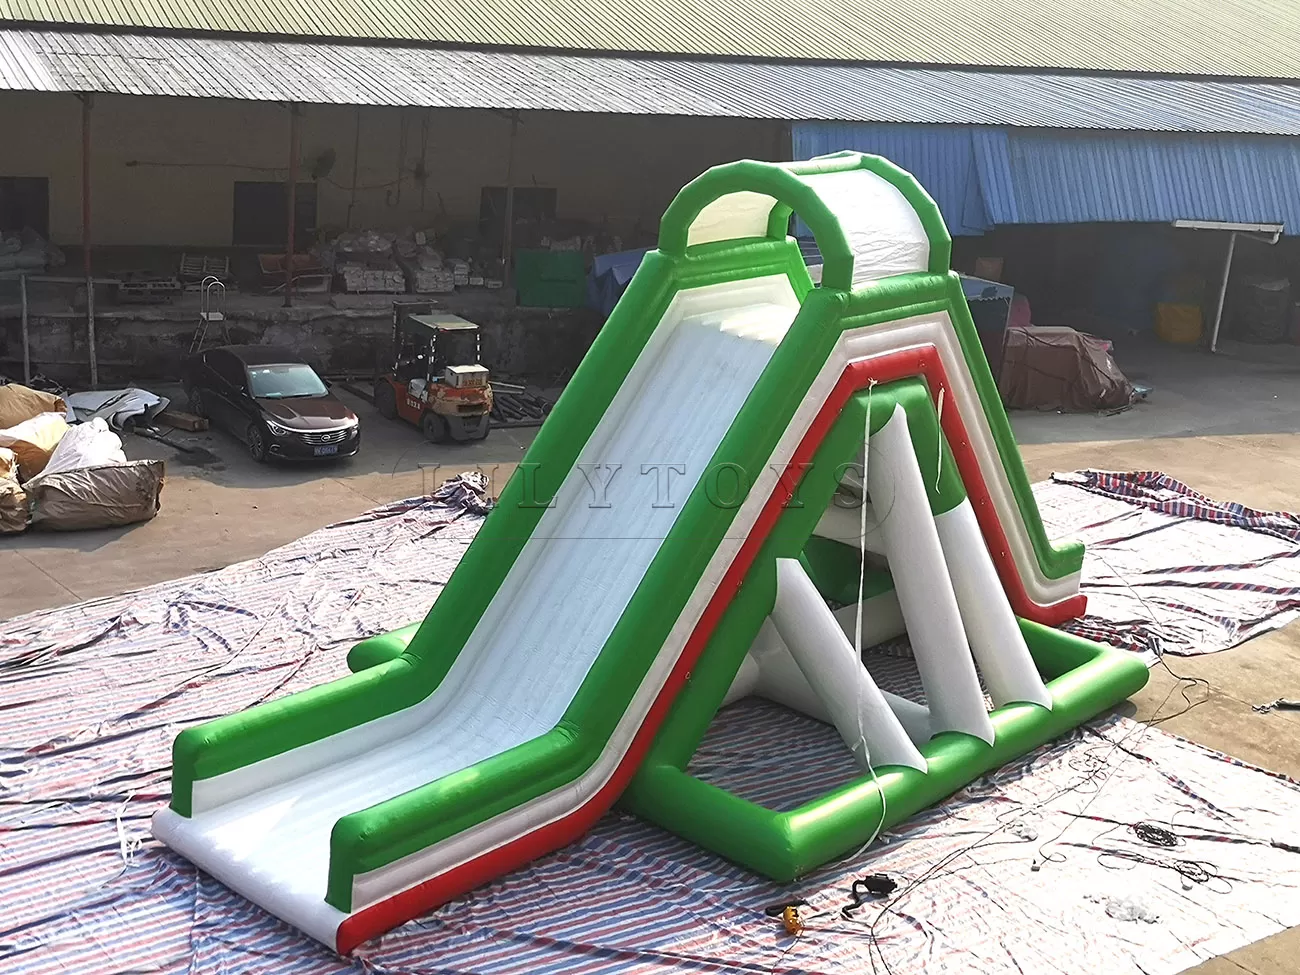 inflatable water slide (1)